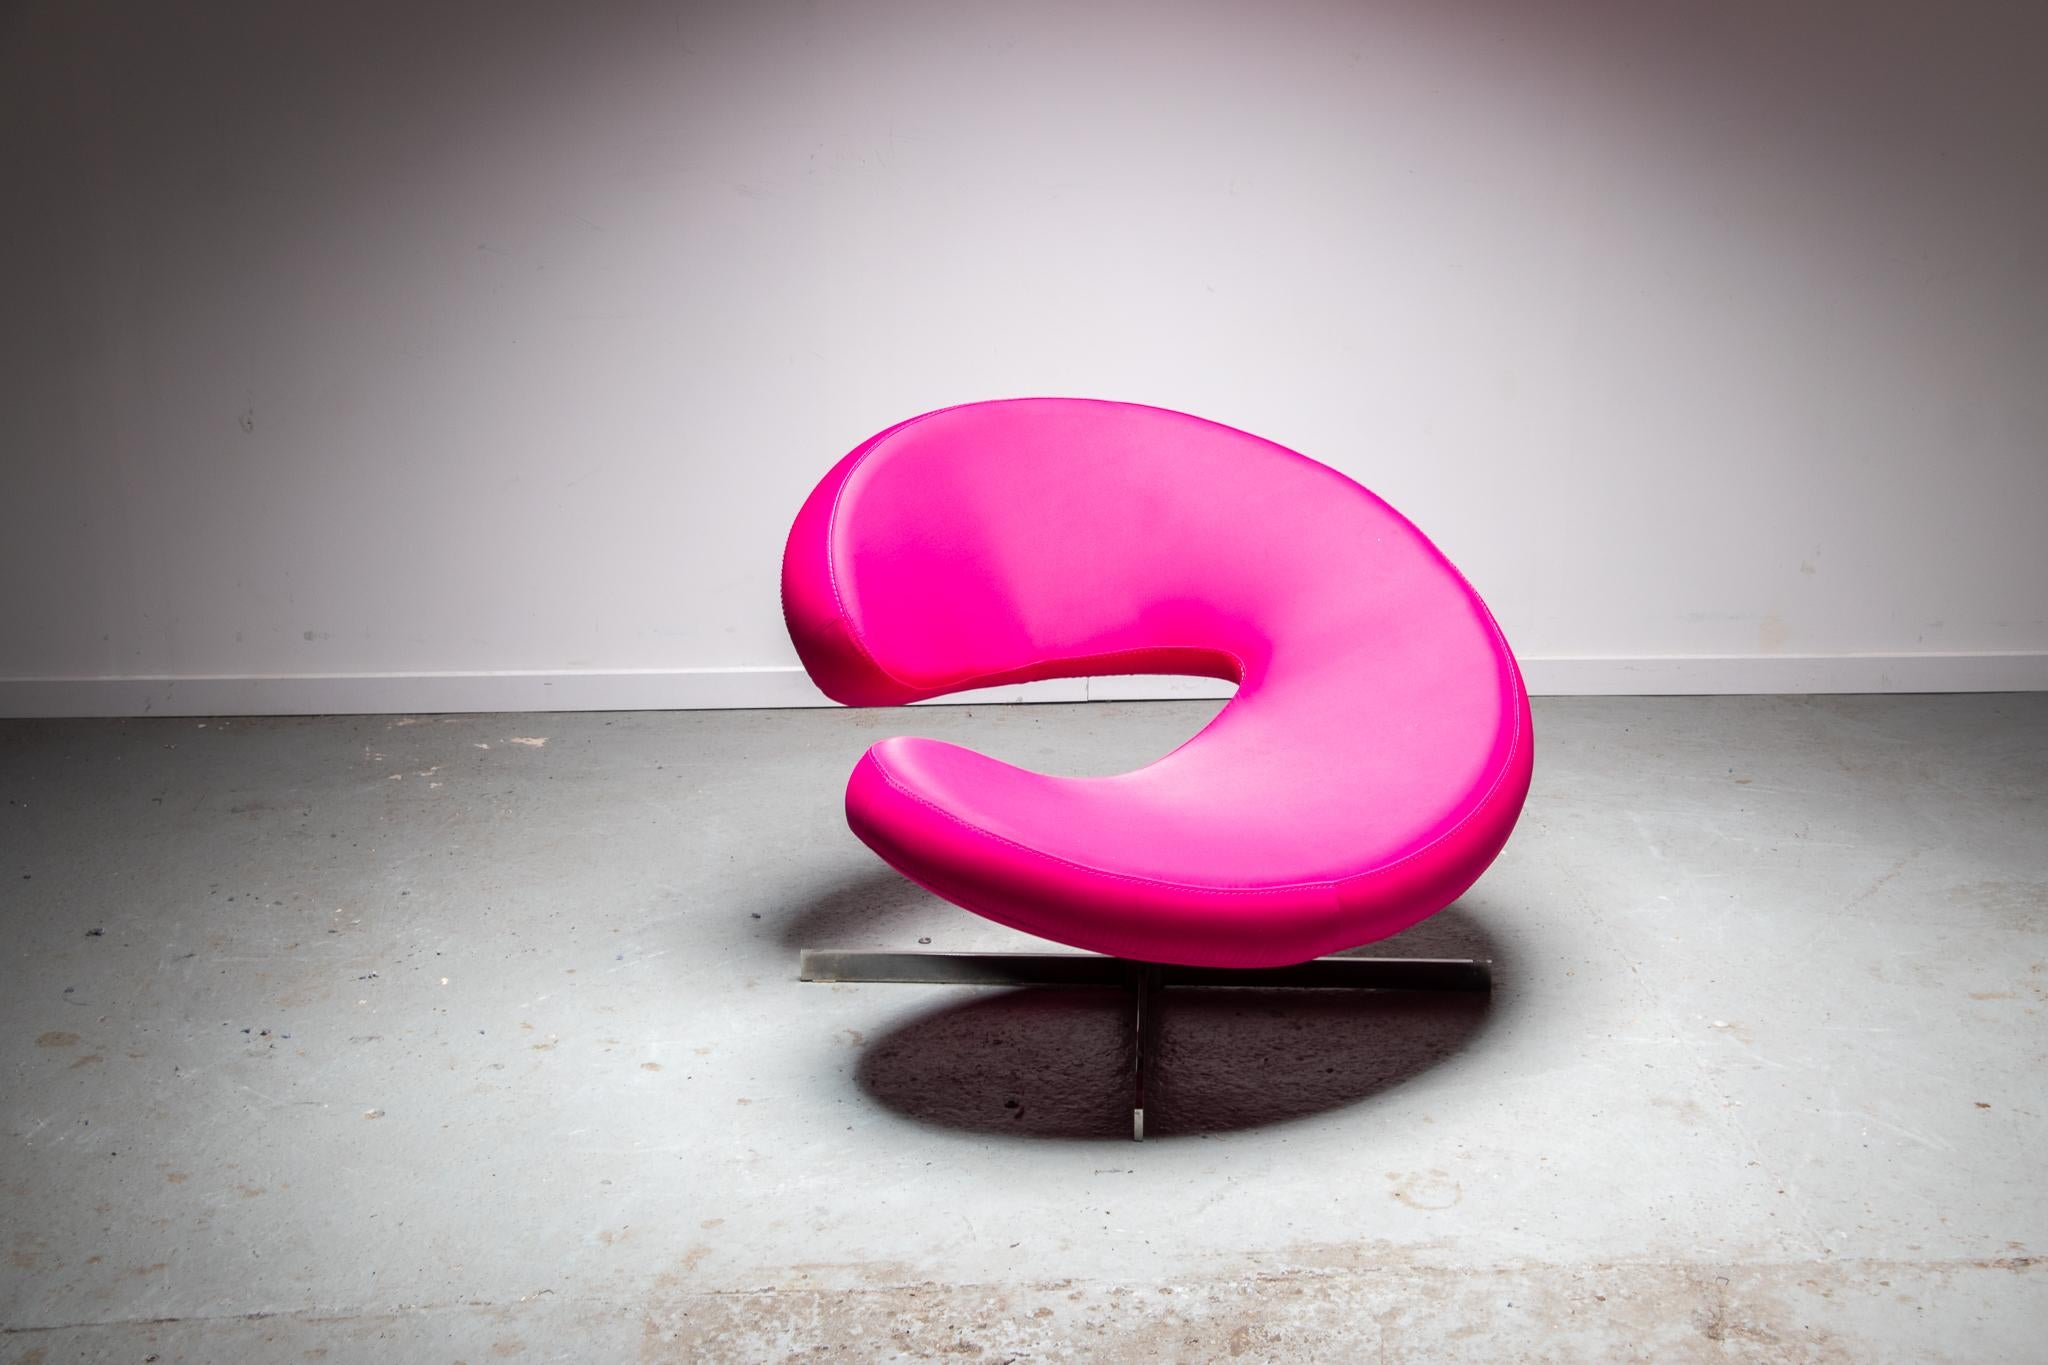 Nuage fauteuil designed by Roberto Tapinassi & Maurizio Manzoni. Upholstered in a pink fabric with a turning chrome base. This fauteuil is in very good condition.Very good condition with minimal signs of use.

Dimensions: Height 67cm Width 91cm